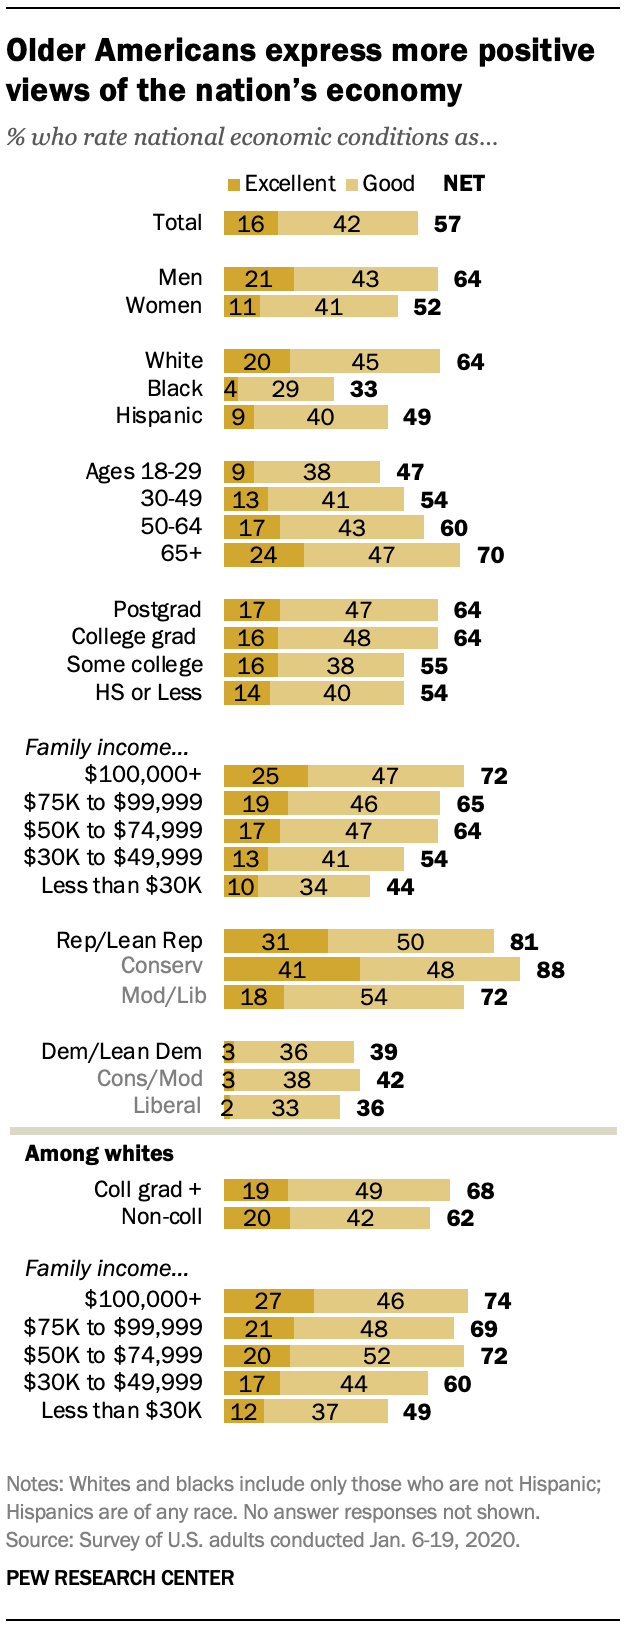 Older Americans express more positive views of the nation’s economy 